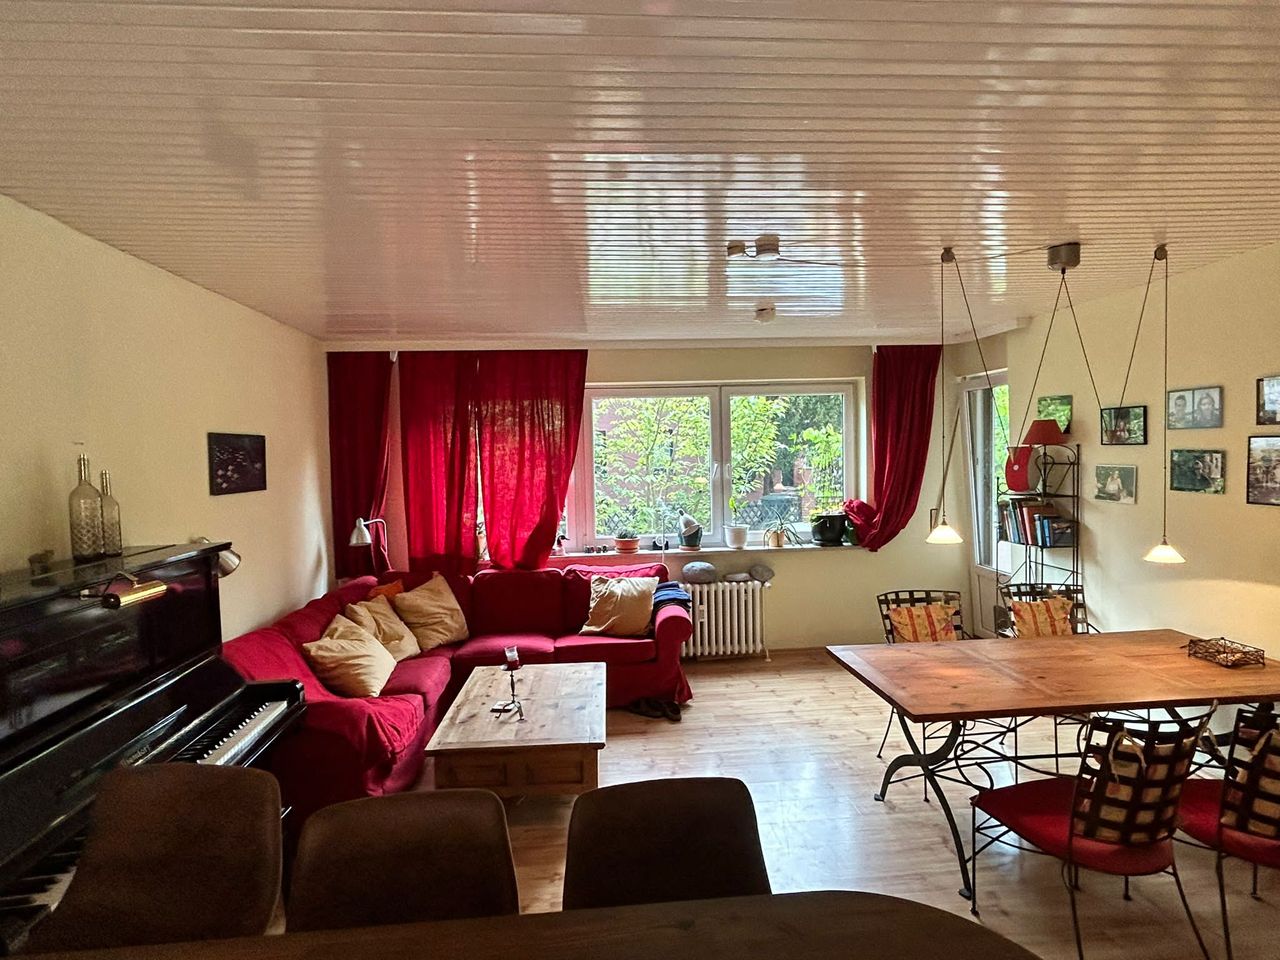 4-room apartment in Berlin – Westend / Ruhleben in the countryside with pool, sauna and large garden, close to the subway, furnished